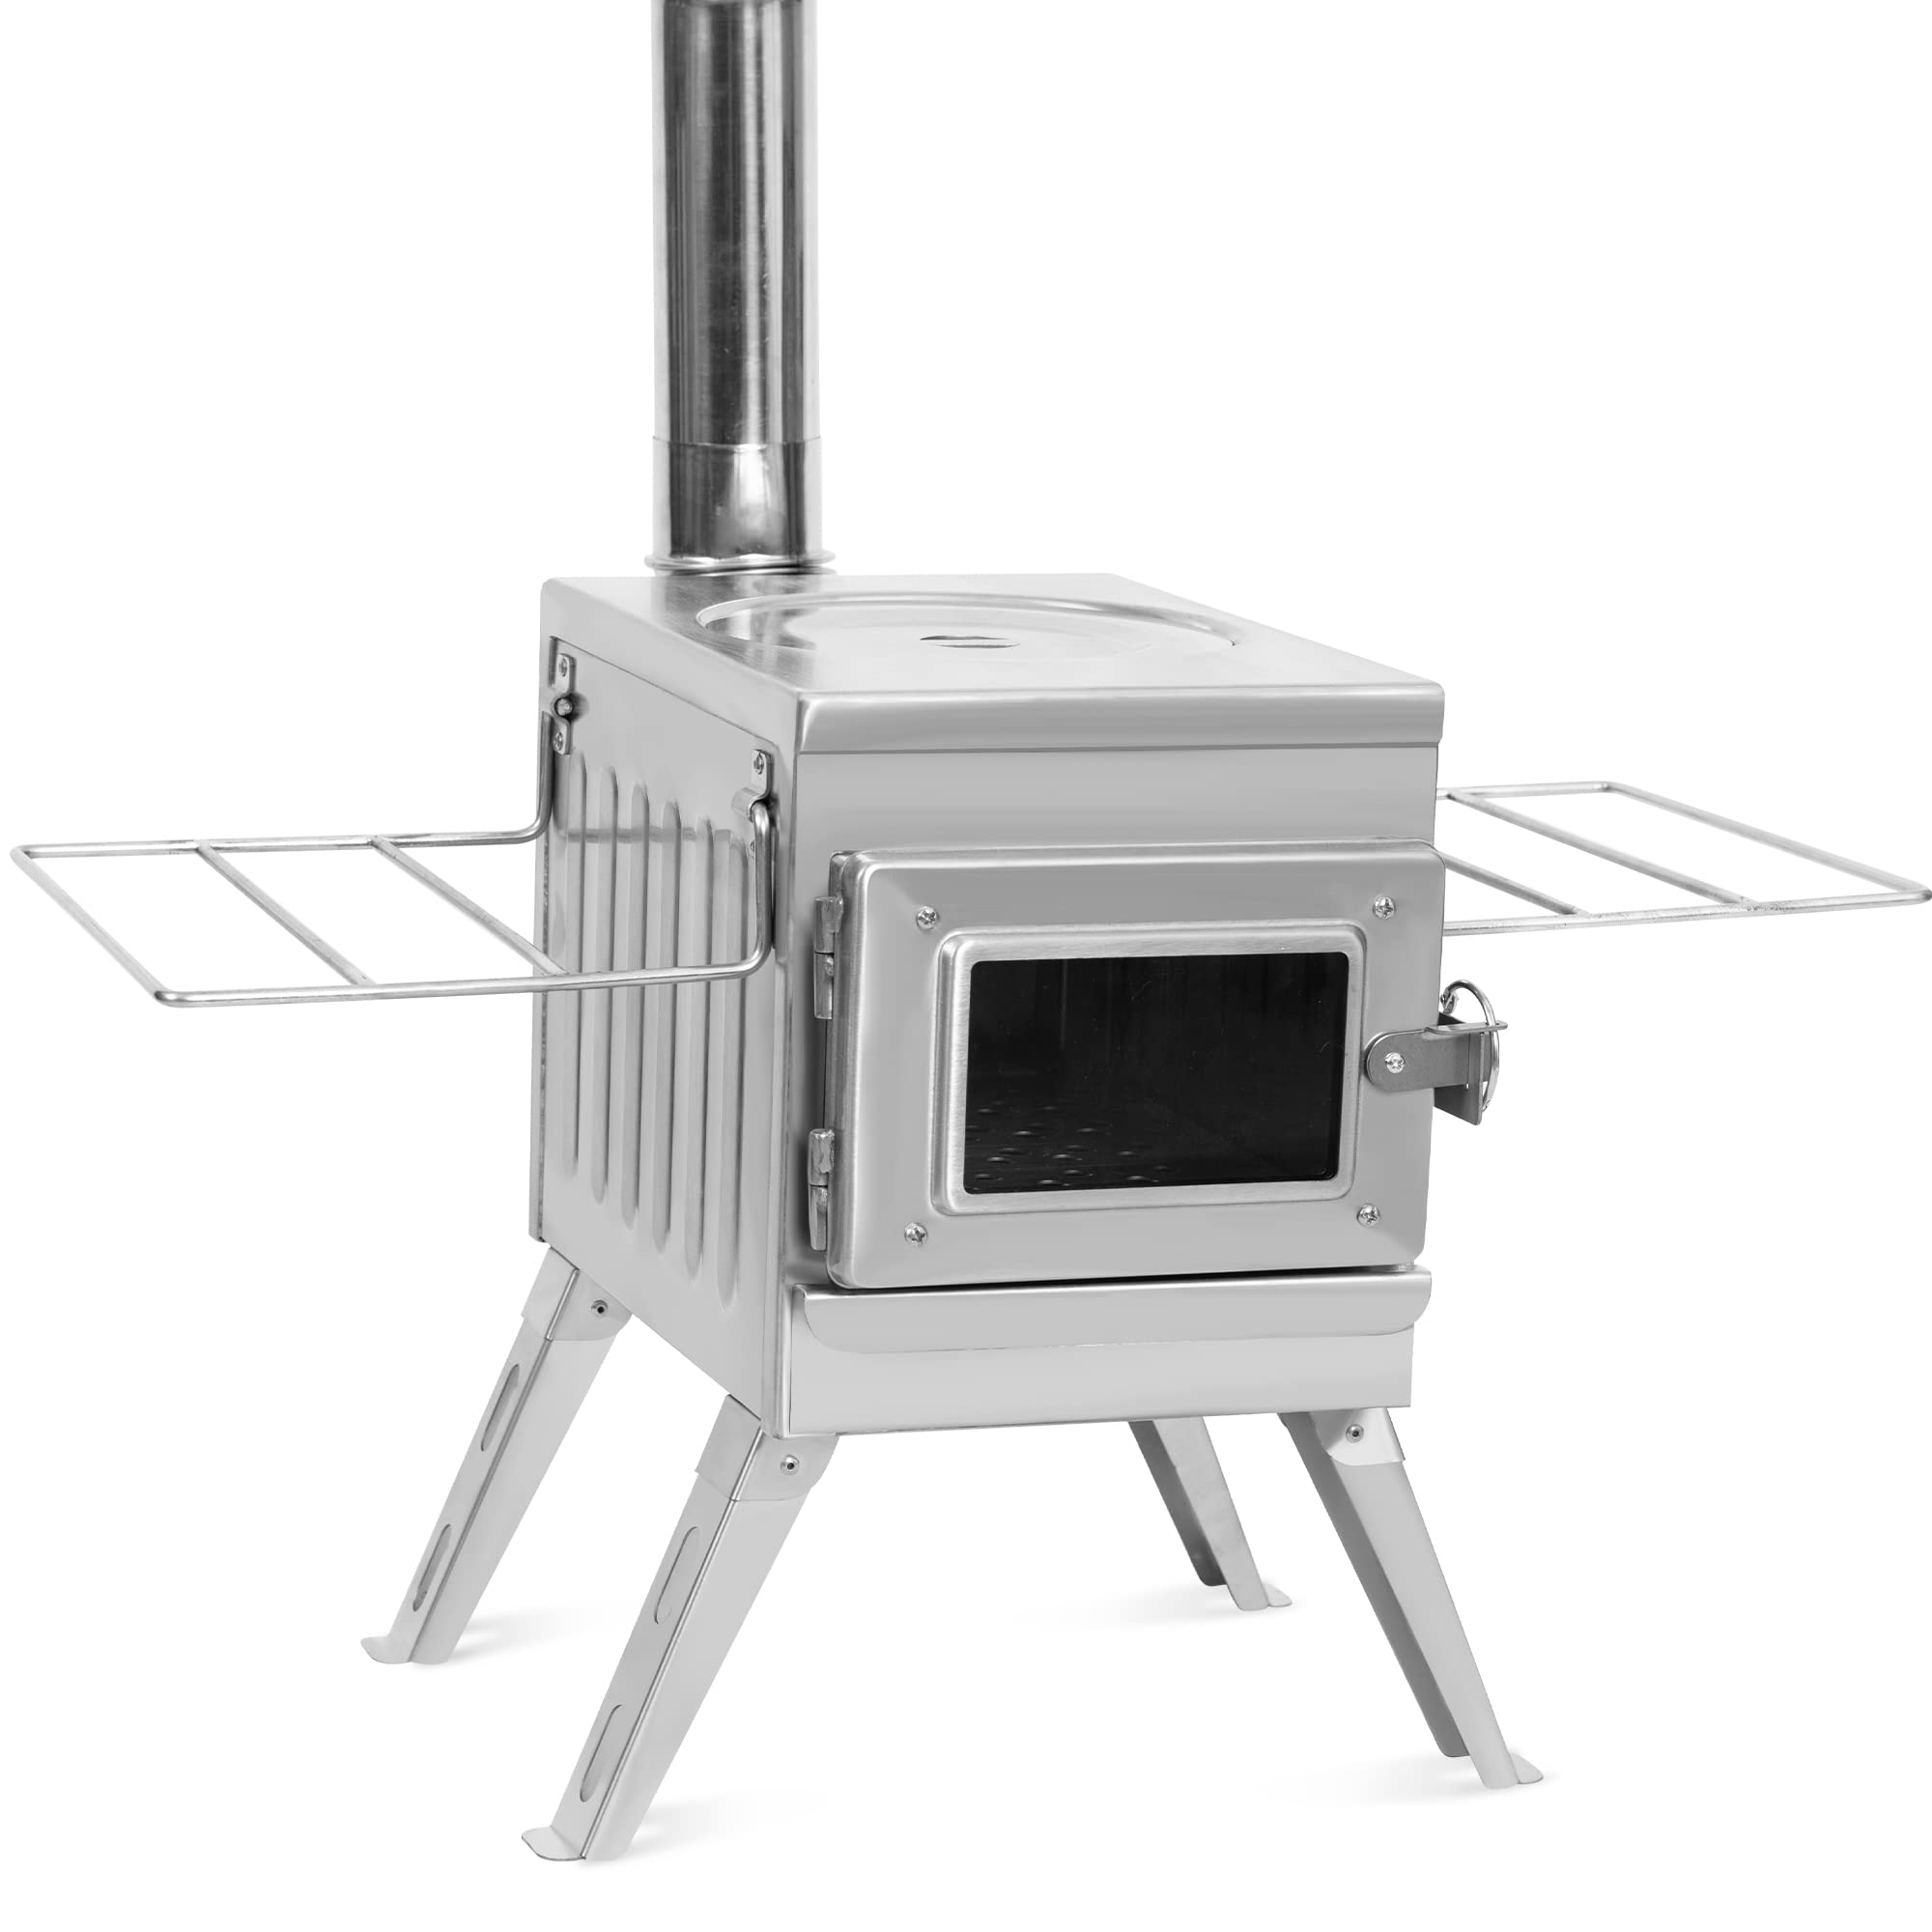 Fltom Camping Wood Stove